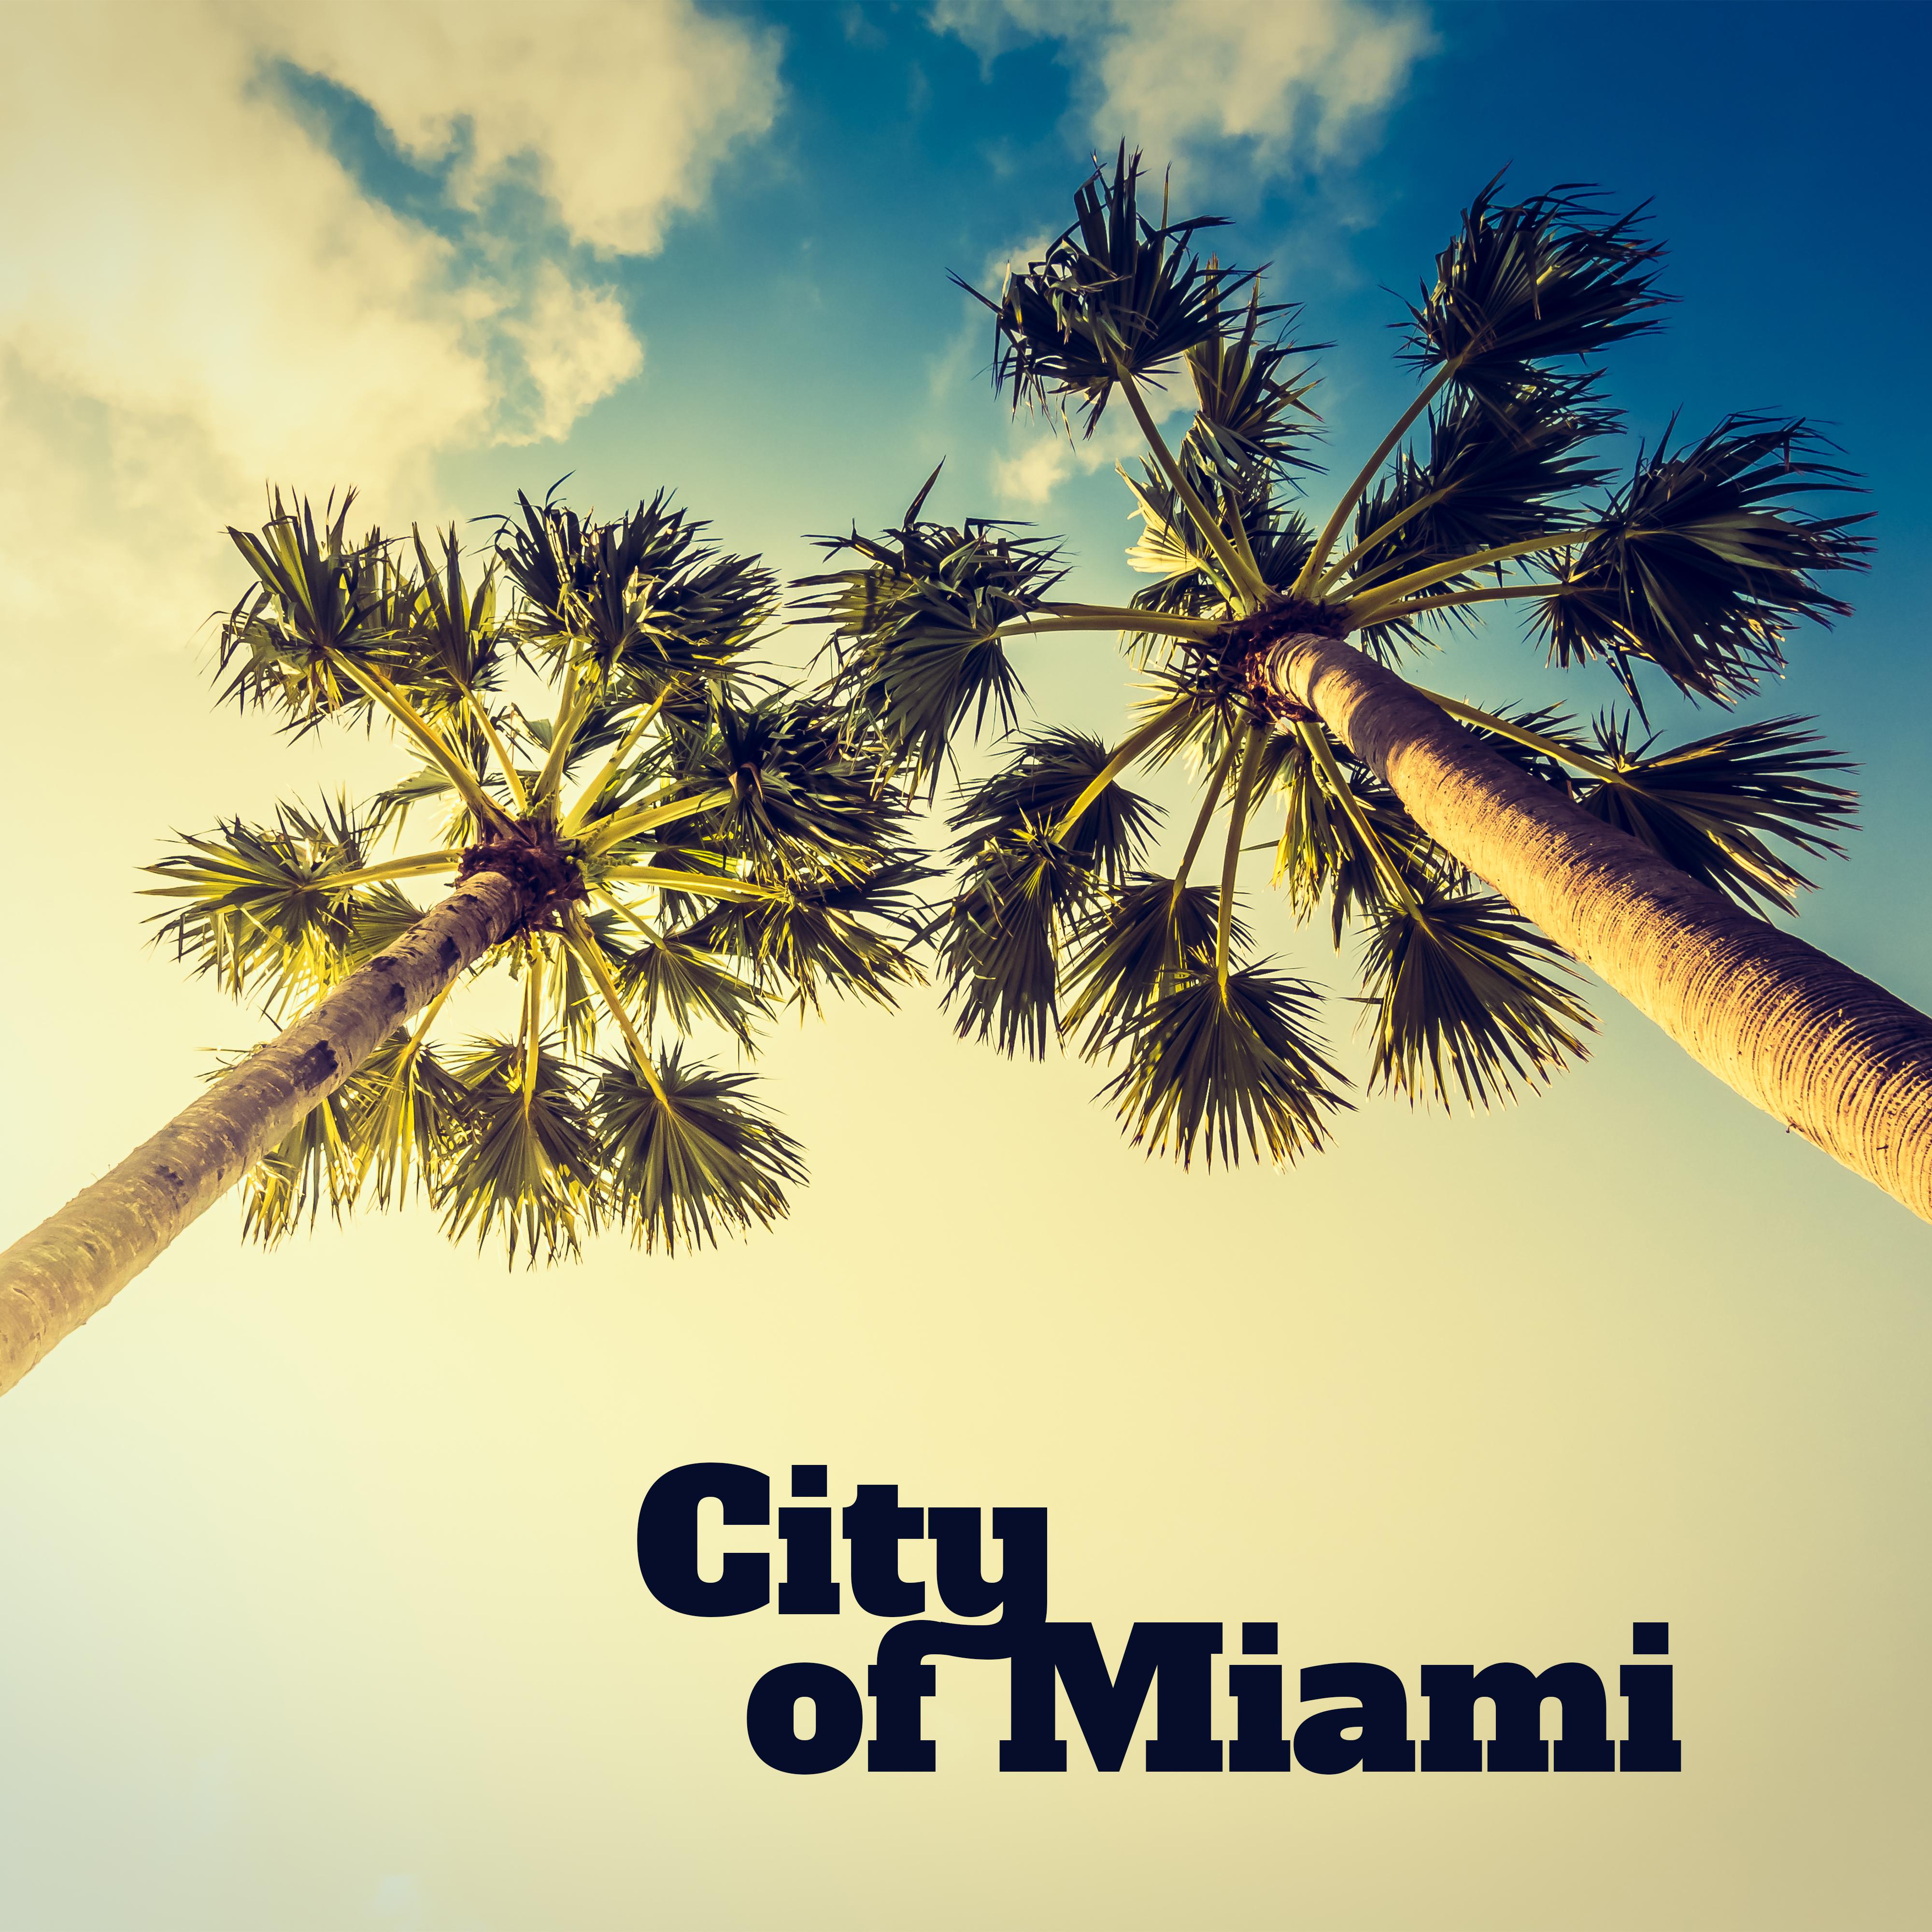 City of Miami: House / Chillout Music from the Coastal Beaches of Florida (Deep Chill Out Rhythms, Sunny Waves, Relaxing Sounds)